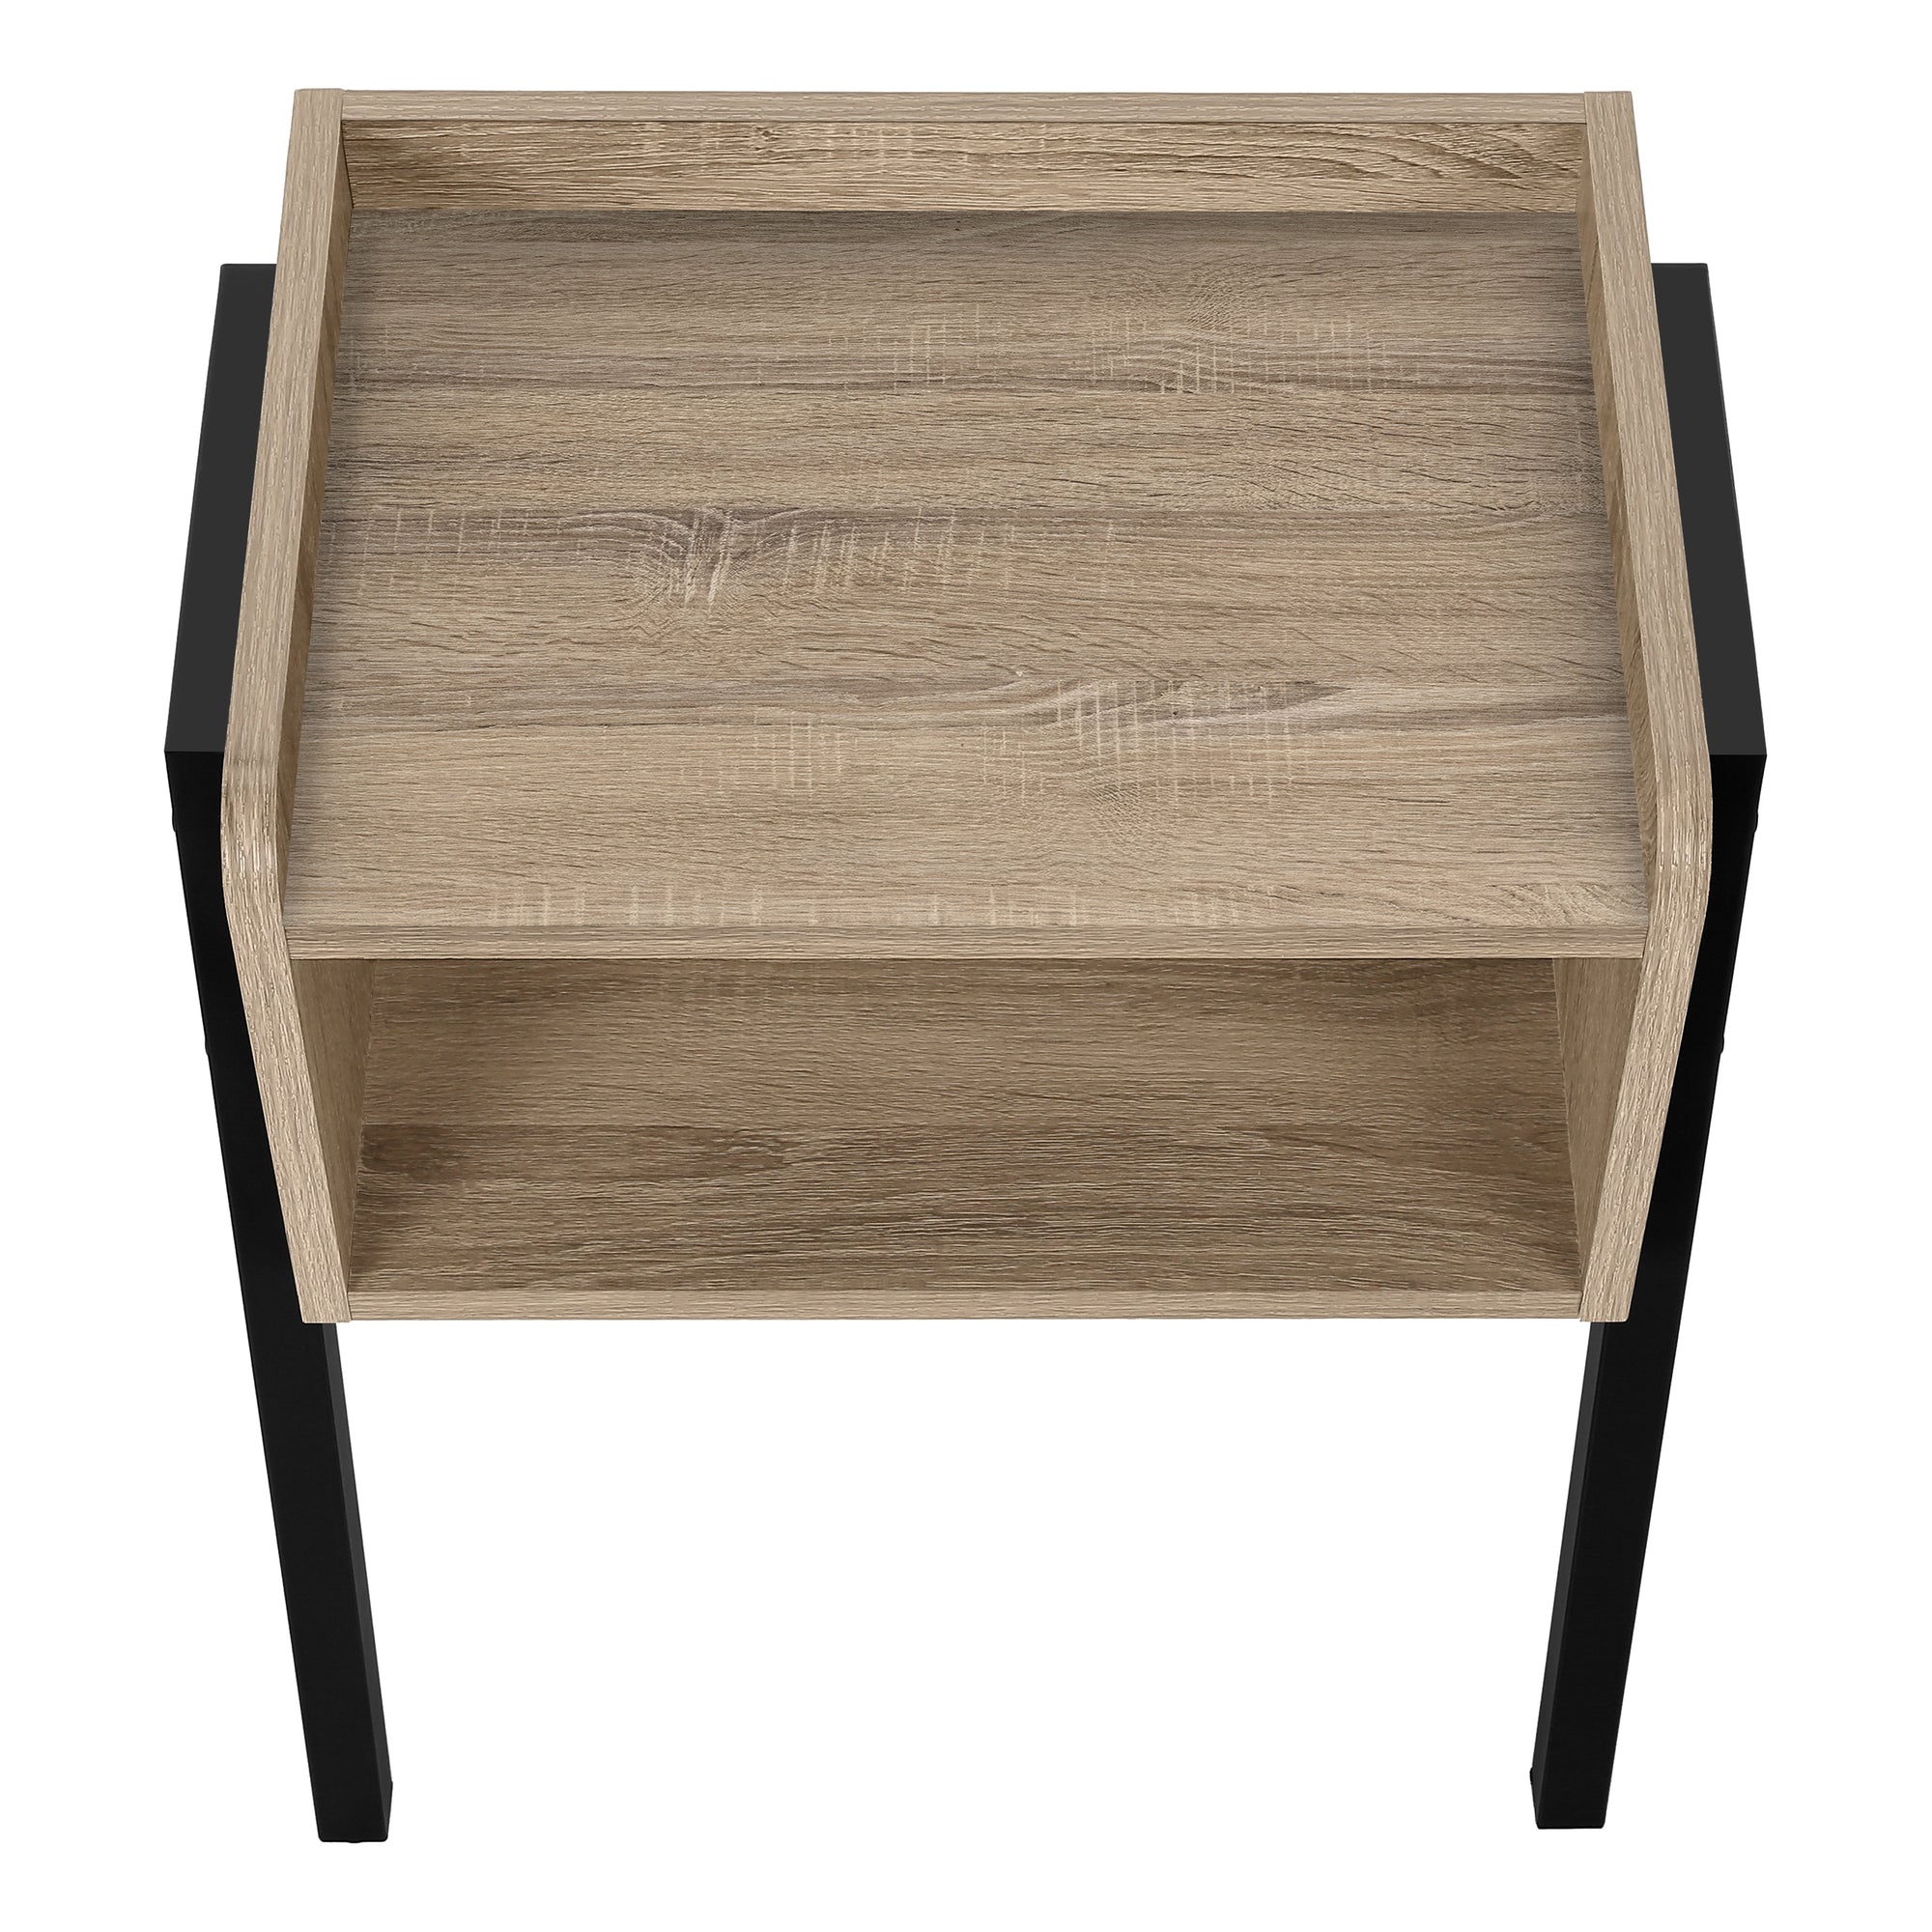 MN-503592    Accent Table, Side, End, Nightstand, Lamp, Living Room, Bedroom, Metal Legs, Laminate, Dark Taupe, Black, Contemporary, Modern